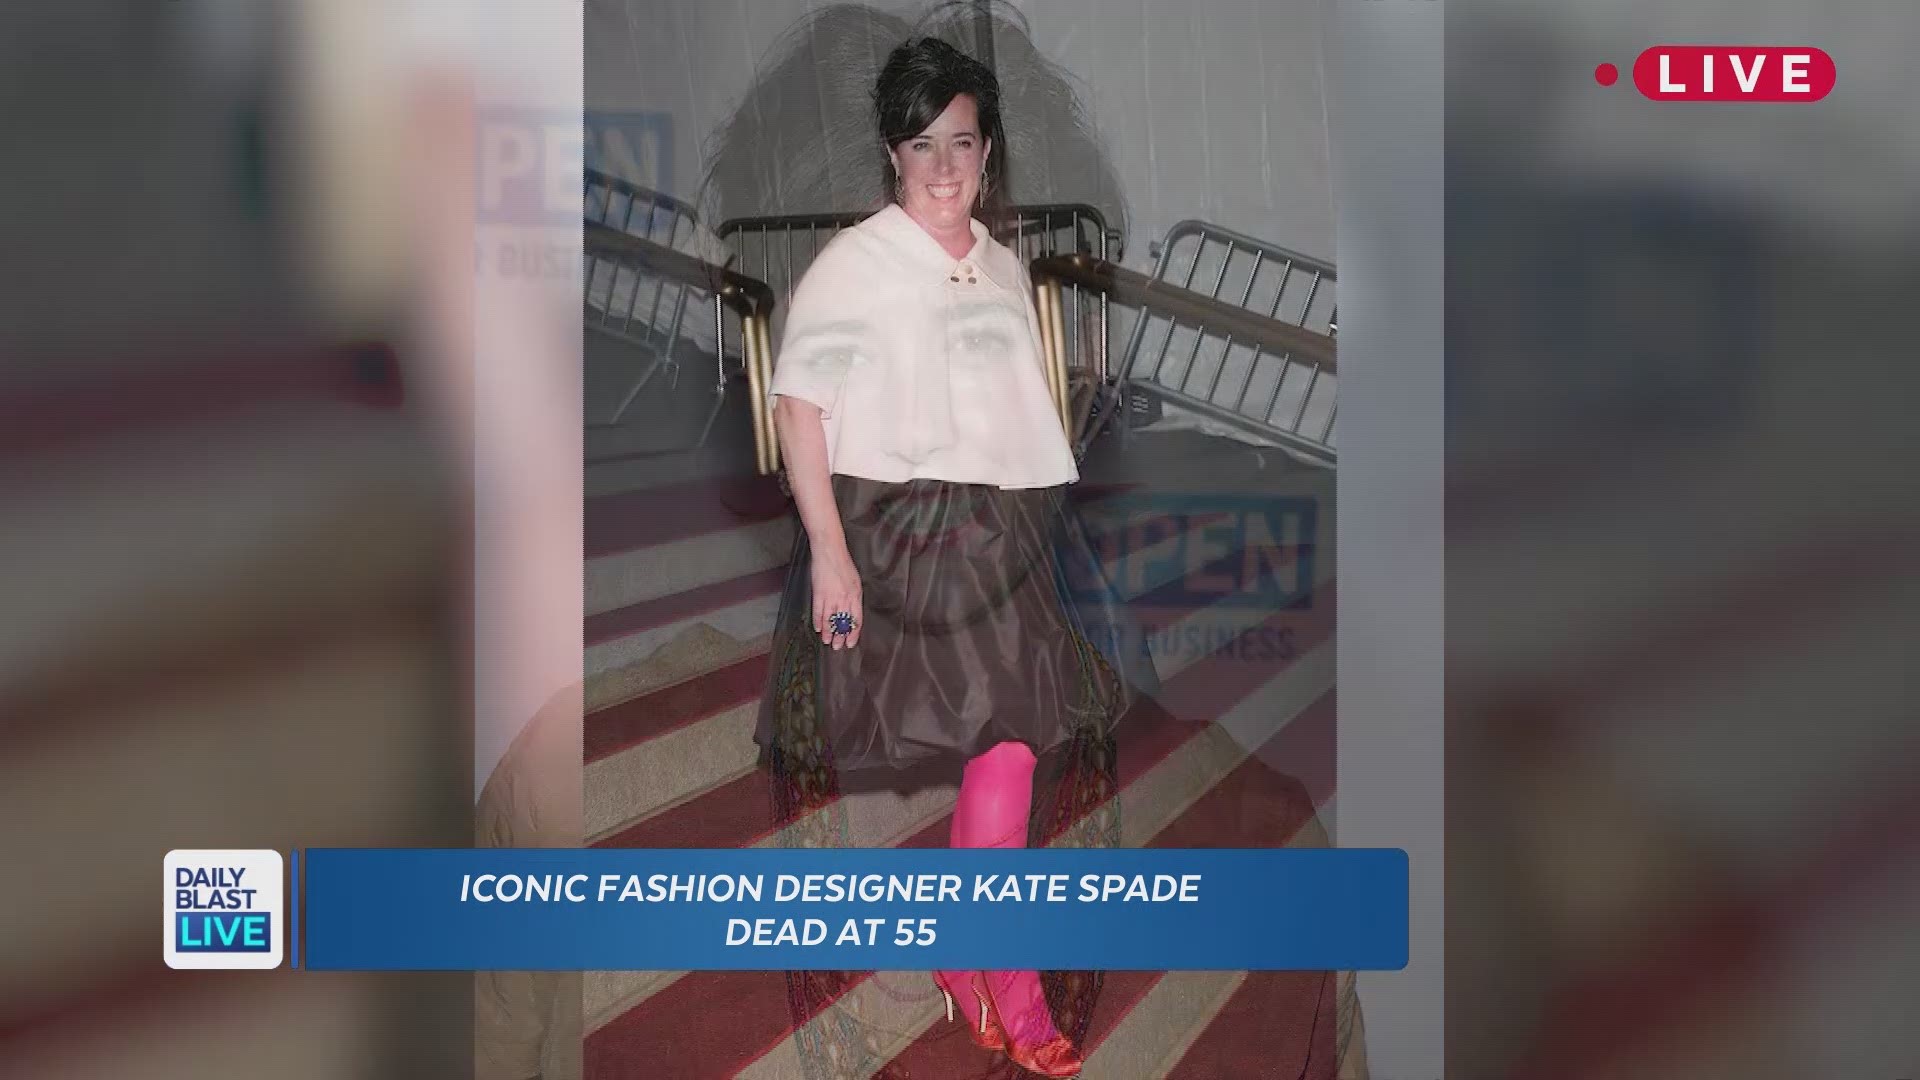 Mom's heartbreaking letter to Kate Spade goes viral 